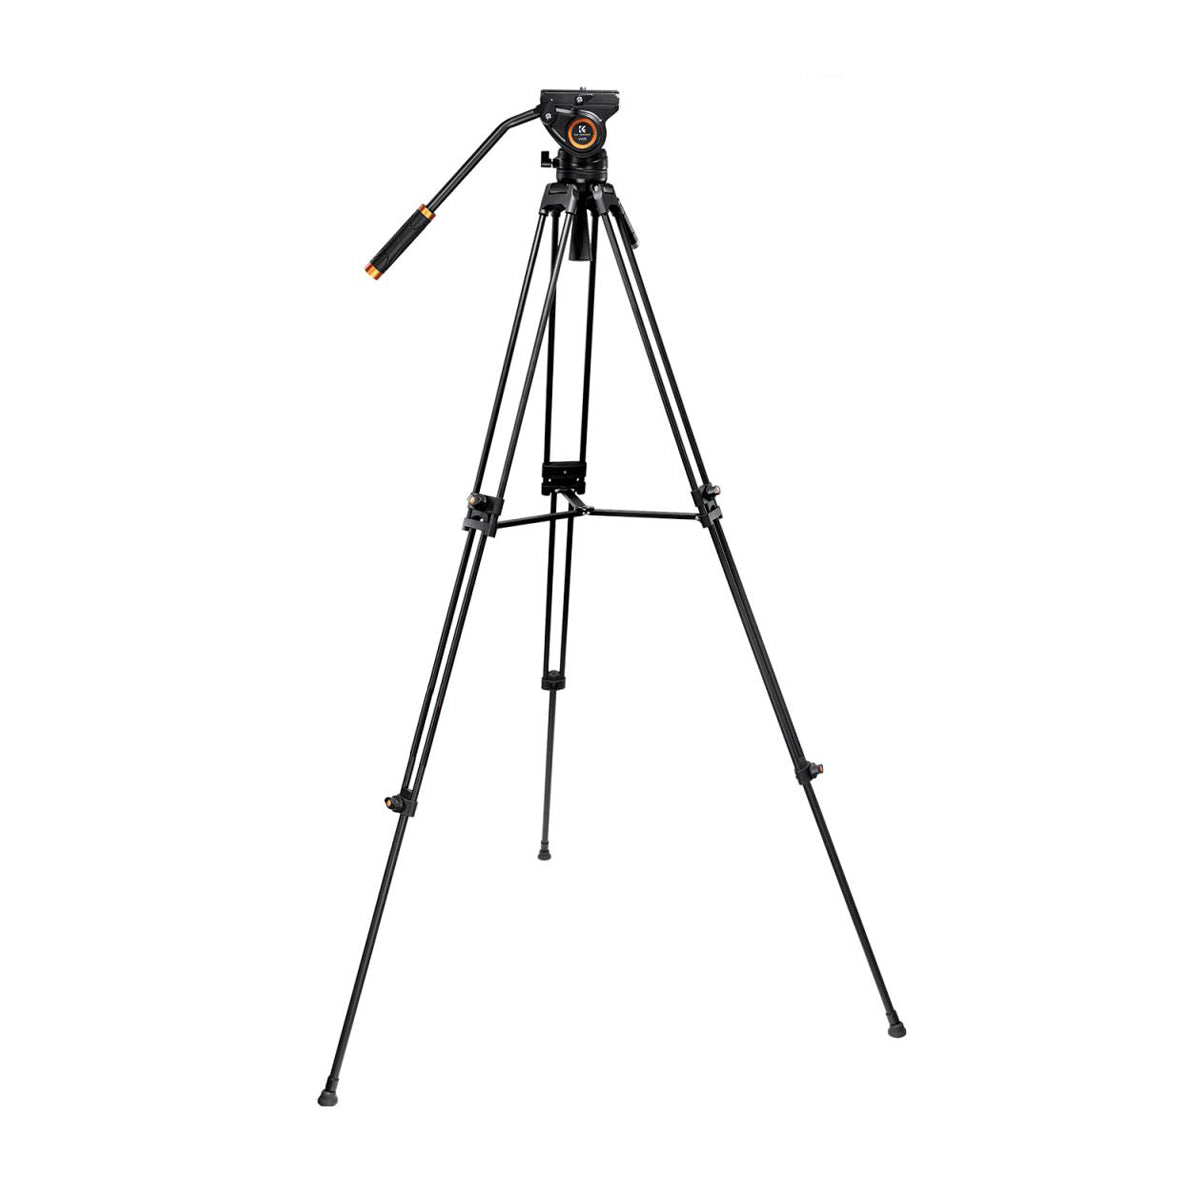 K&F Concept VA18+ VH081 Heavy Duty 3-Section Professional Tripod and Stabilized Mounting Fluid Video Head with 8kg Max Payload, 72" Max Height with Locking Knobs and QR Plates for Photography and Videography KF09-121